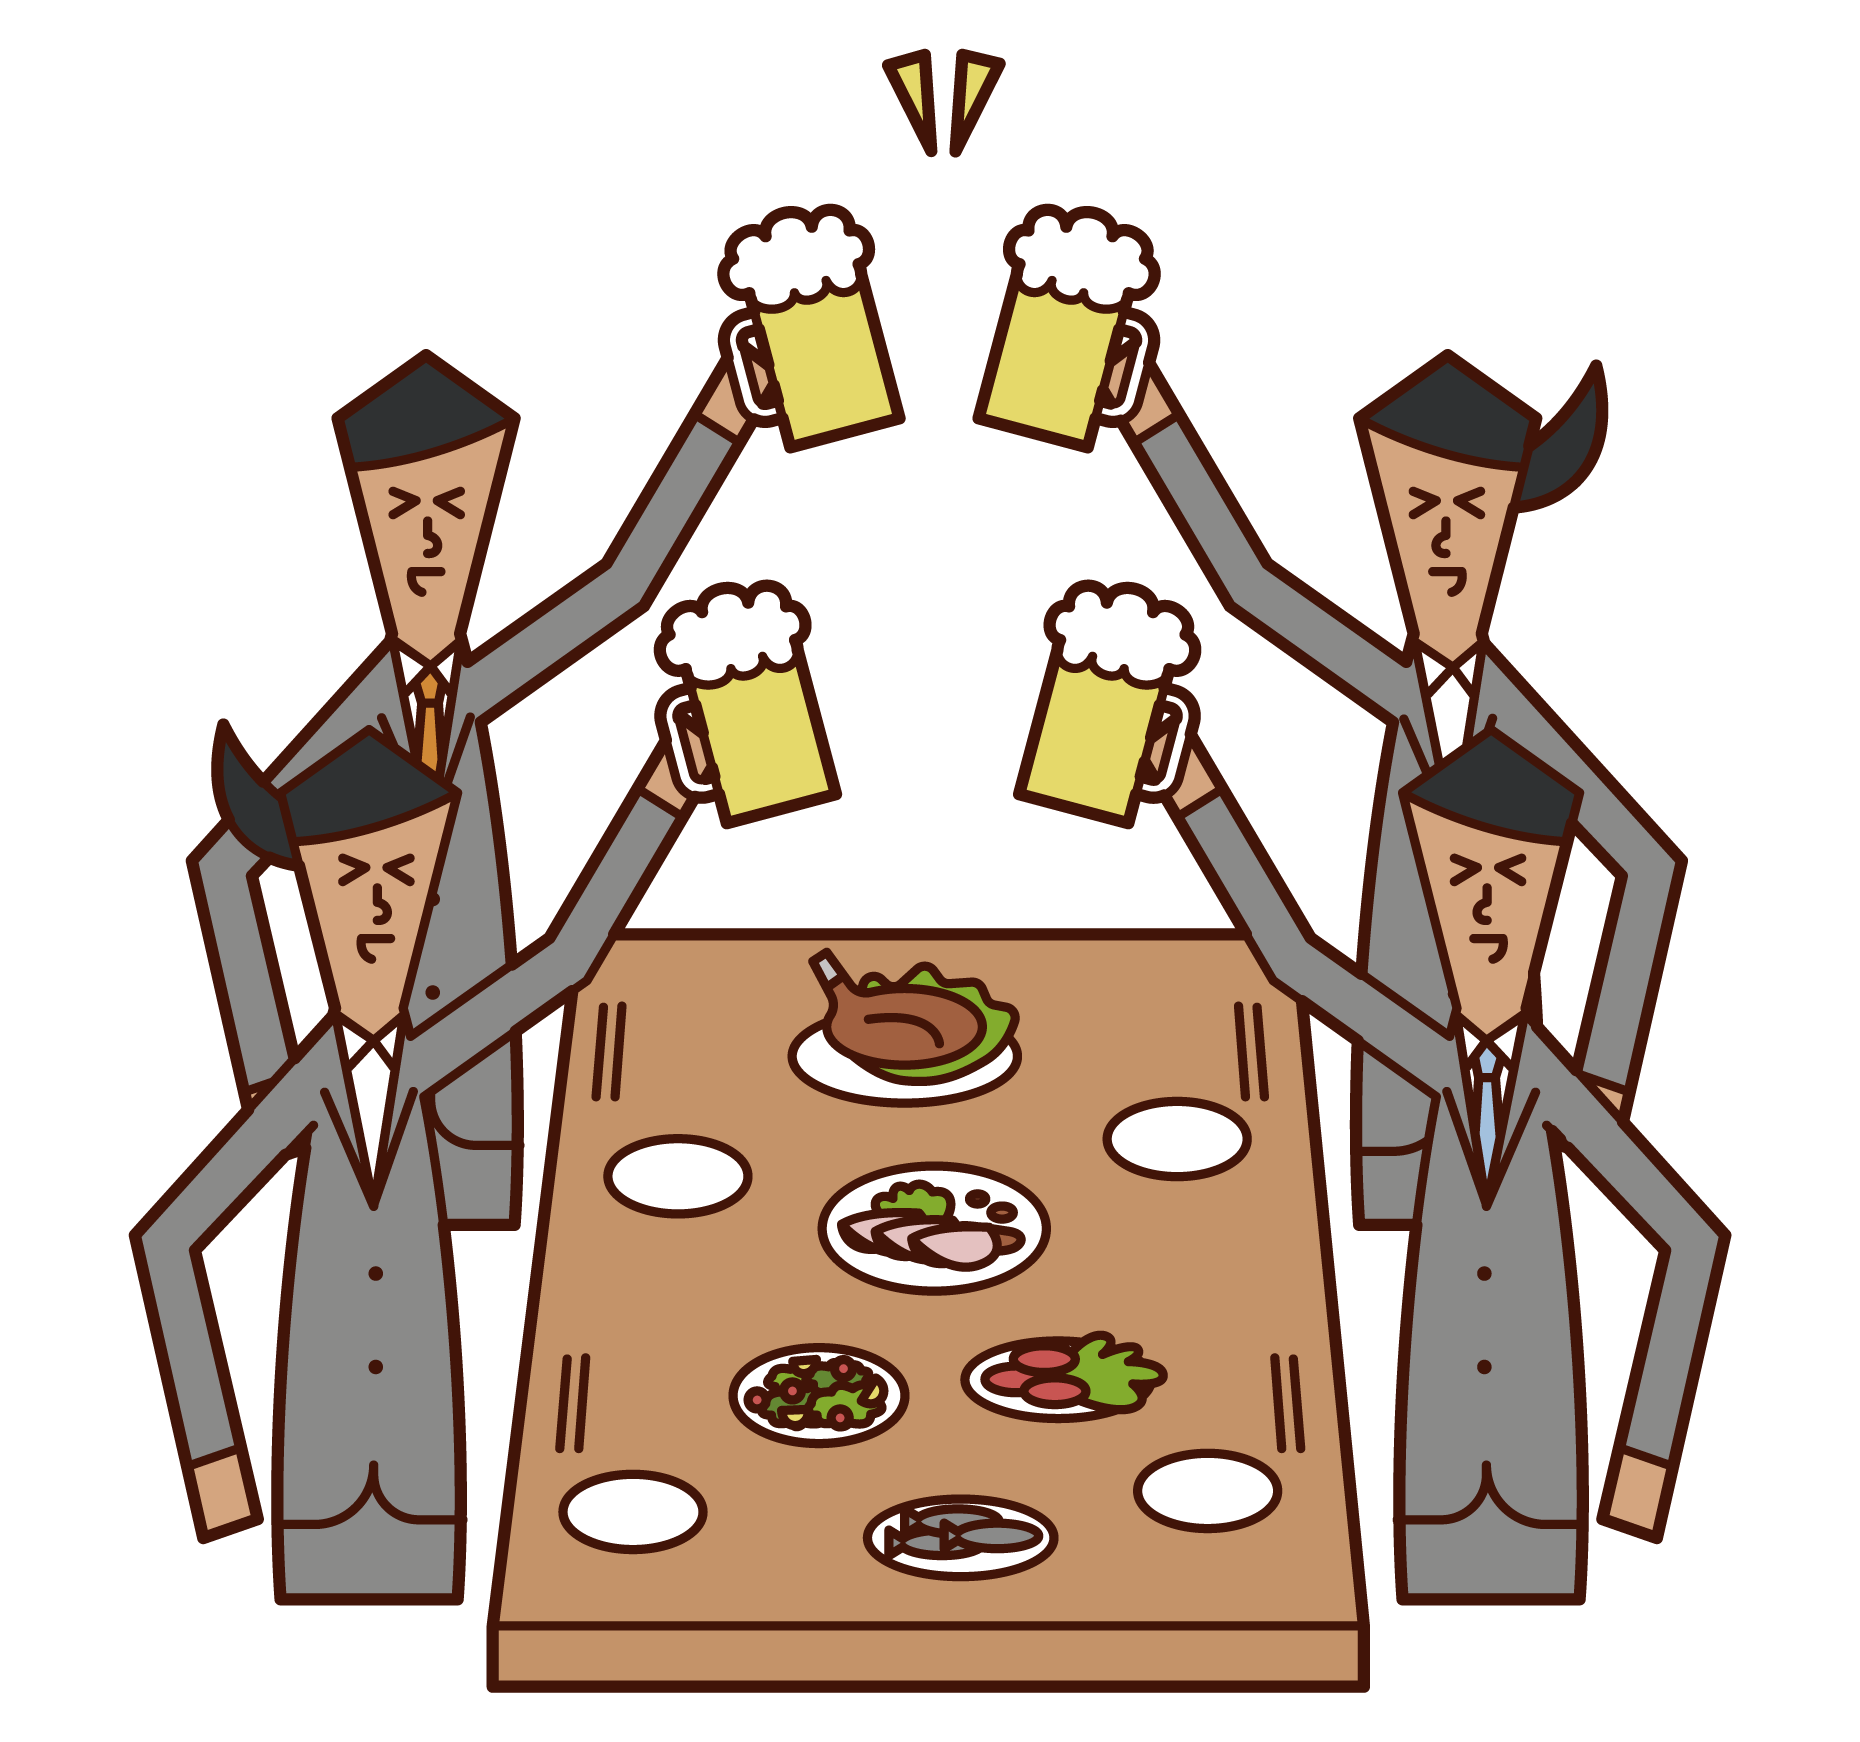 Illustrations of people toasting at a drinking party